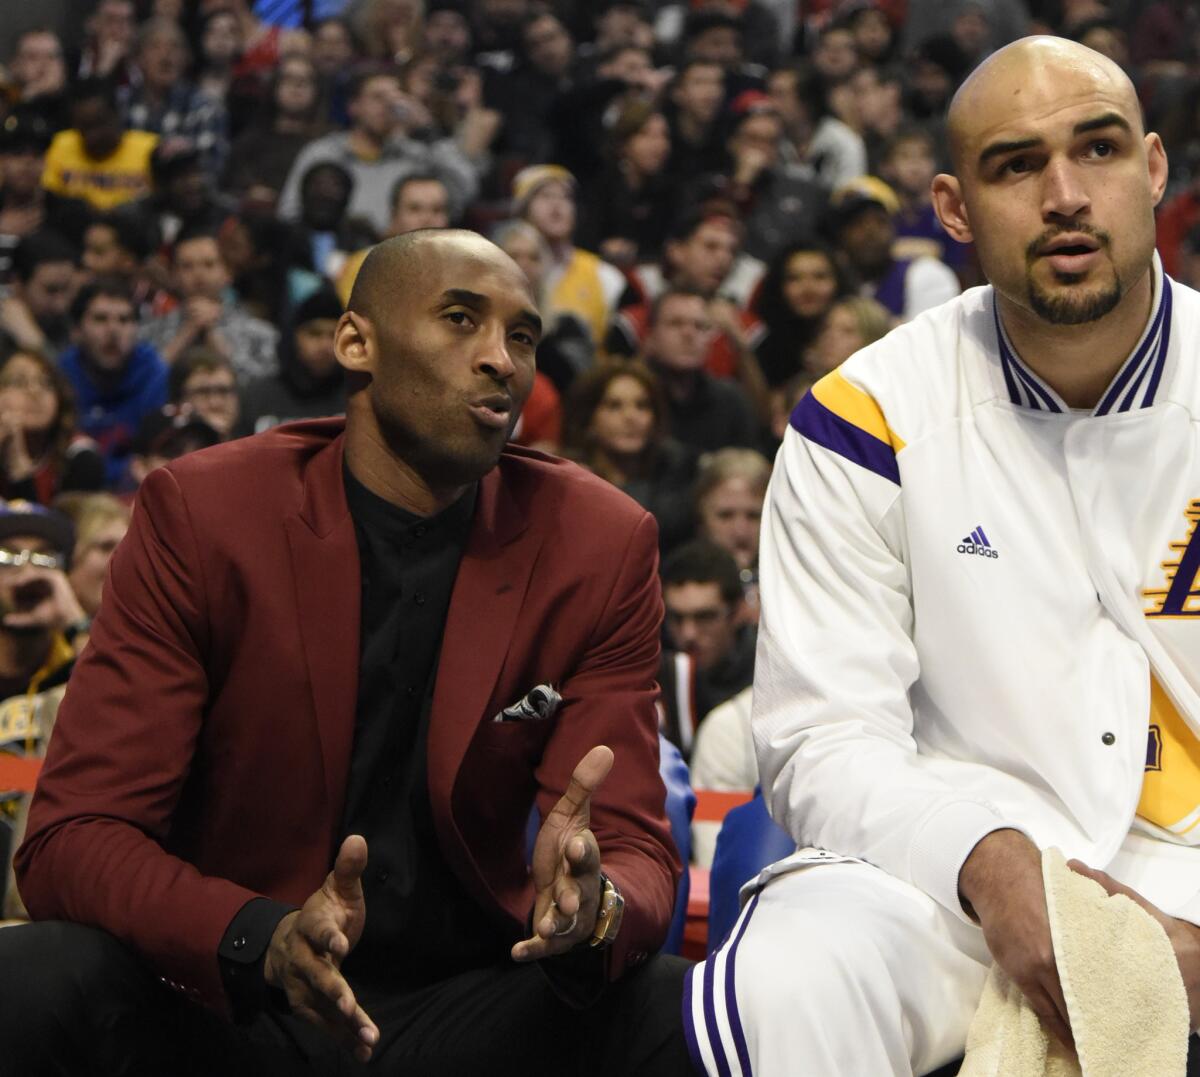 Lakers guard Kobe Bryant, sitting out his second consecutive game because of soreness, chats with center Robert Sacre in the first half.